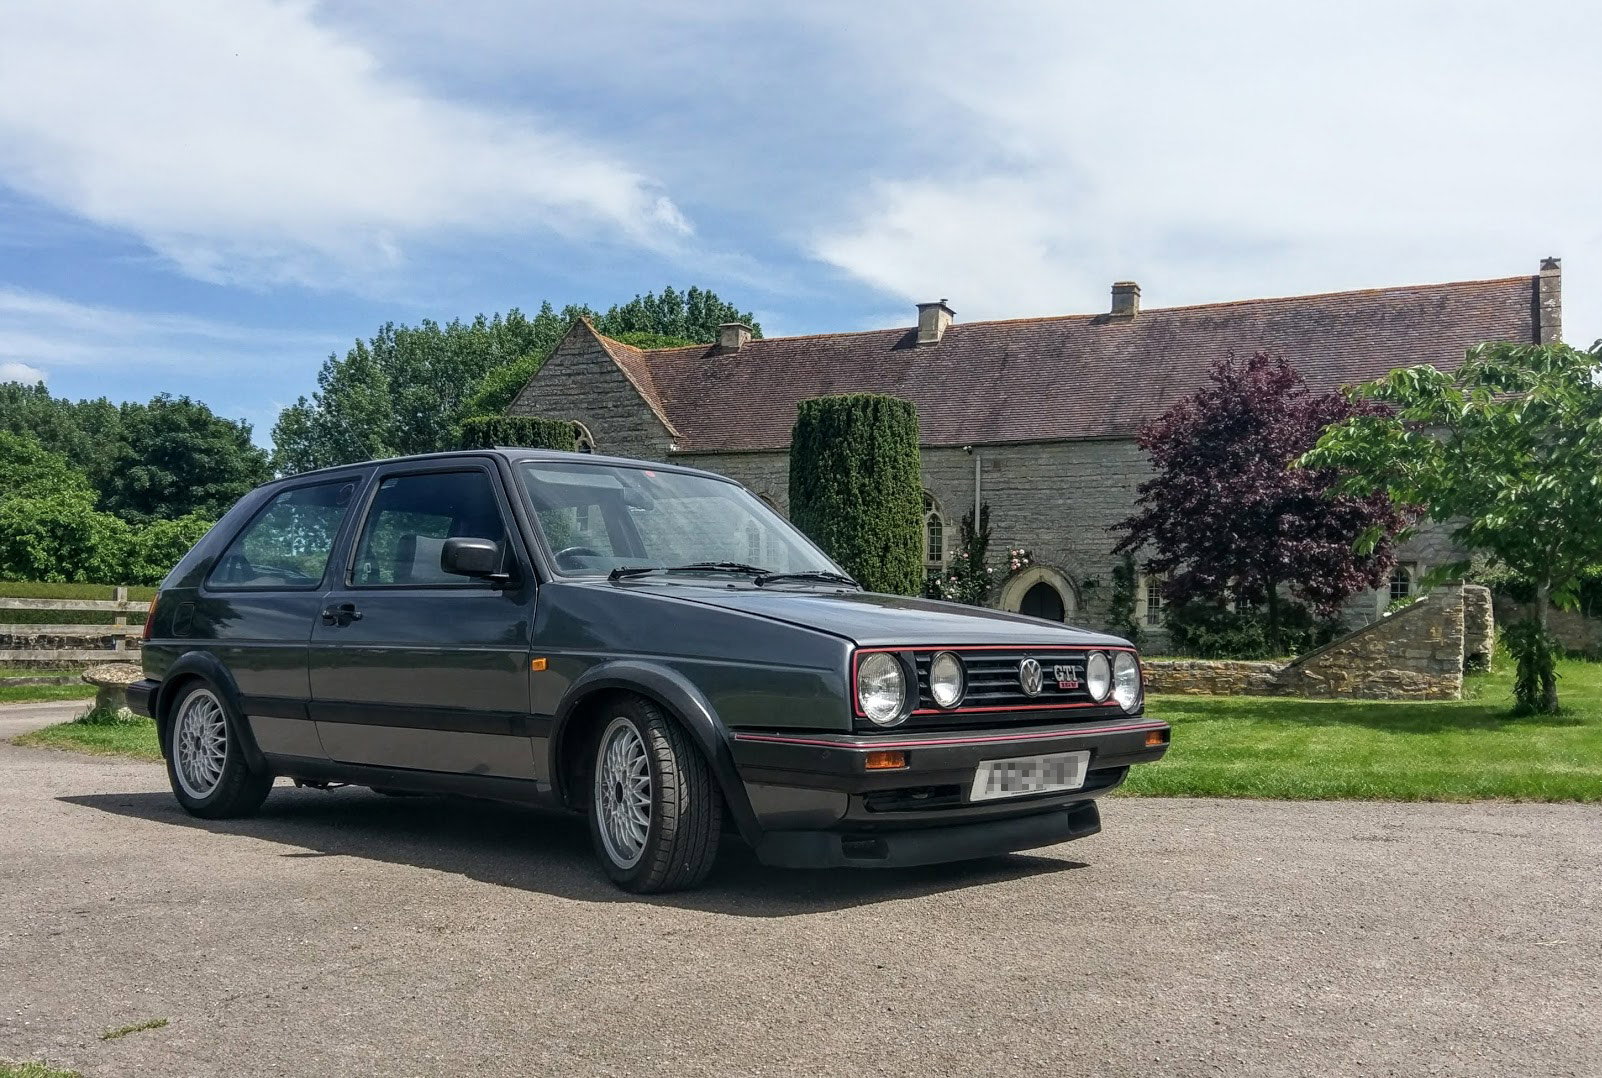 Ben Stinson bought a Footman James classic car laid-up policy that covered his classic VW Golf GTI while it was off the road and undergoing restoration work.